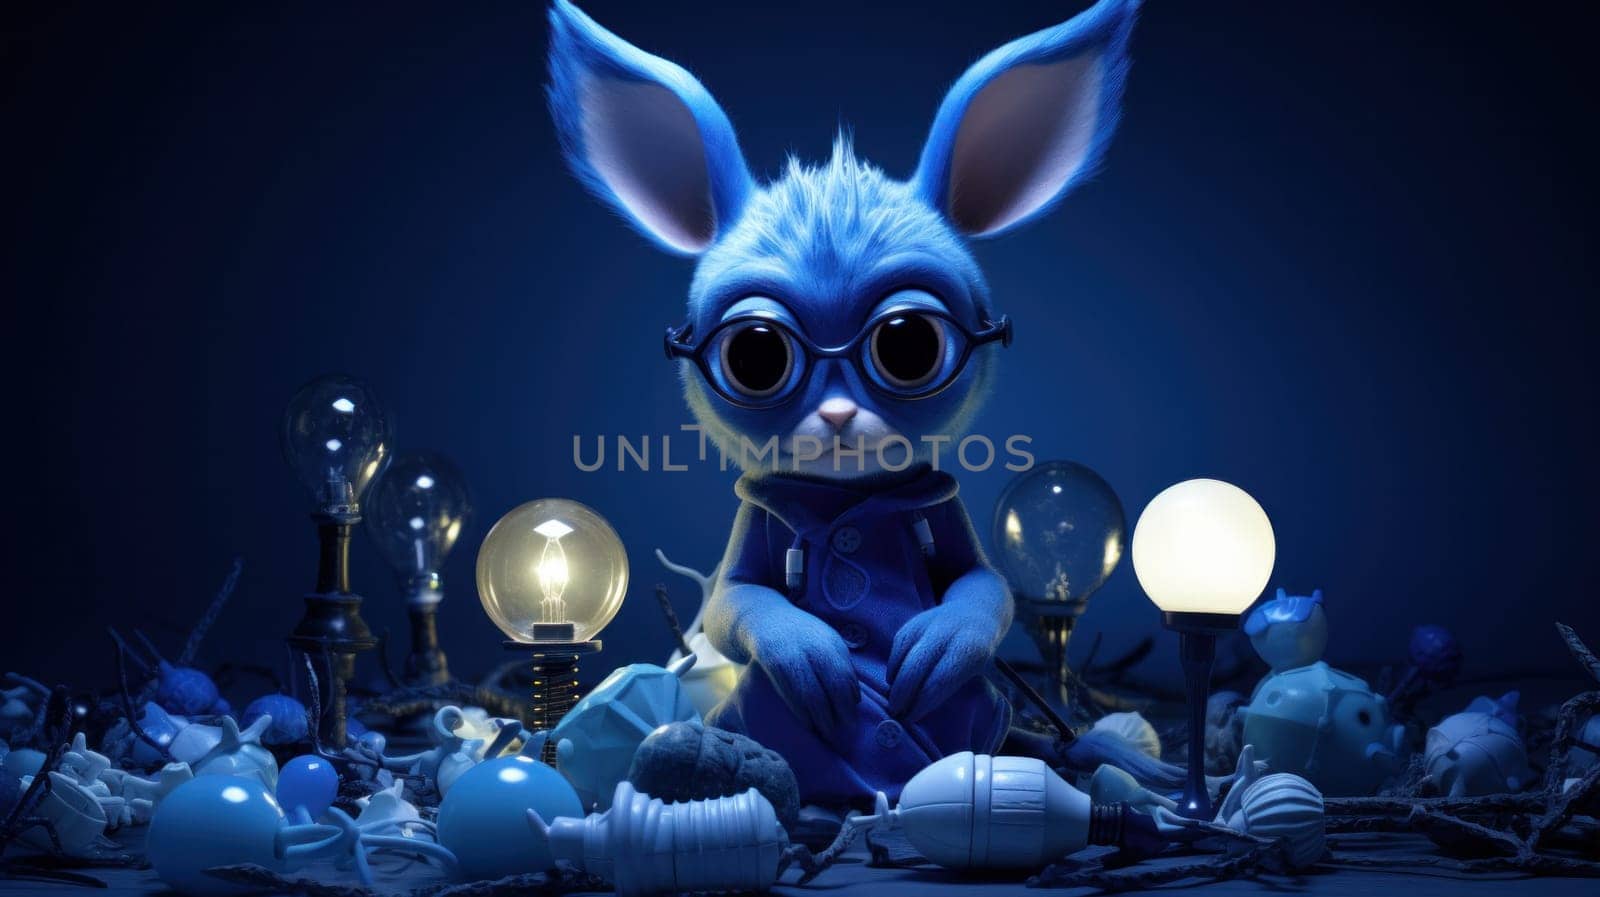 A blue rabbit with glasses sitting in a dark room surrounded by light bulbs, AI by starush